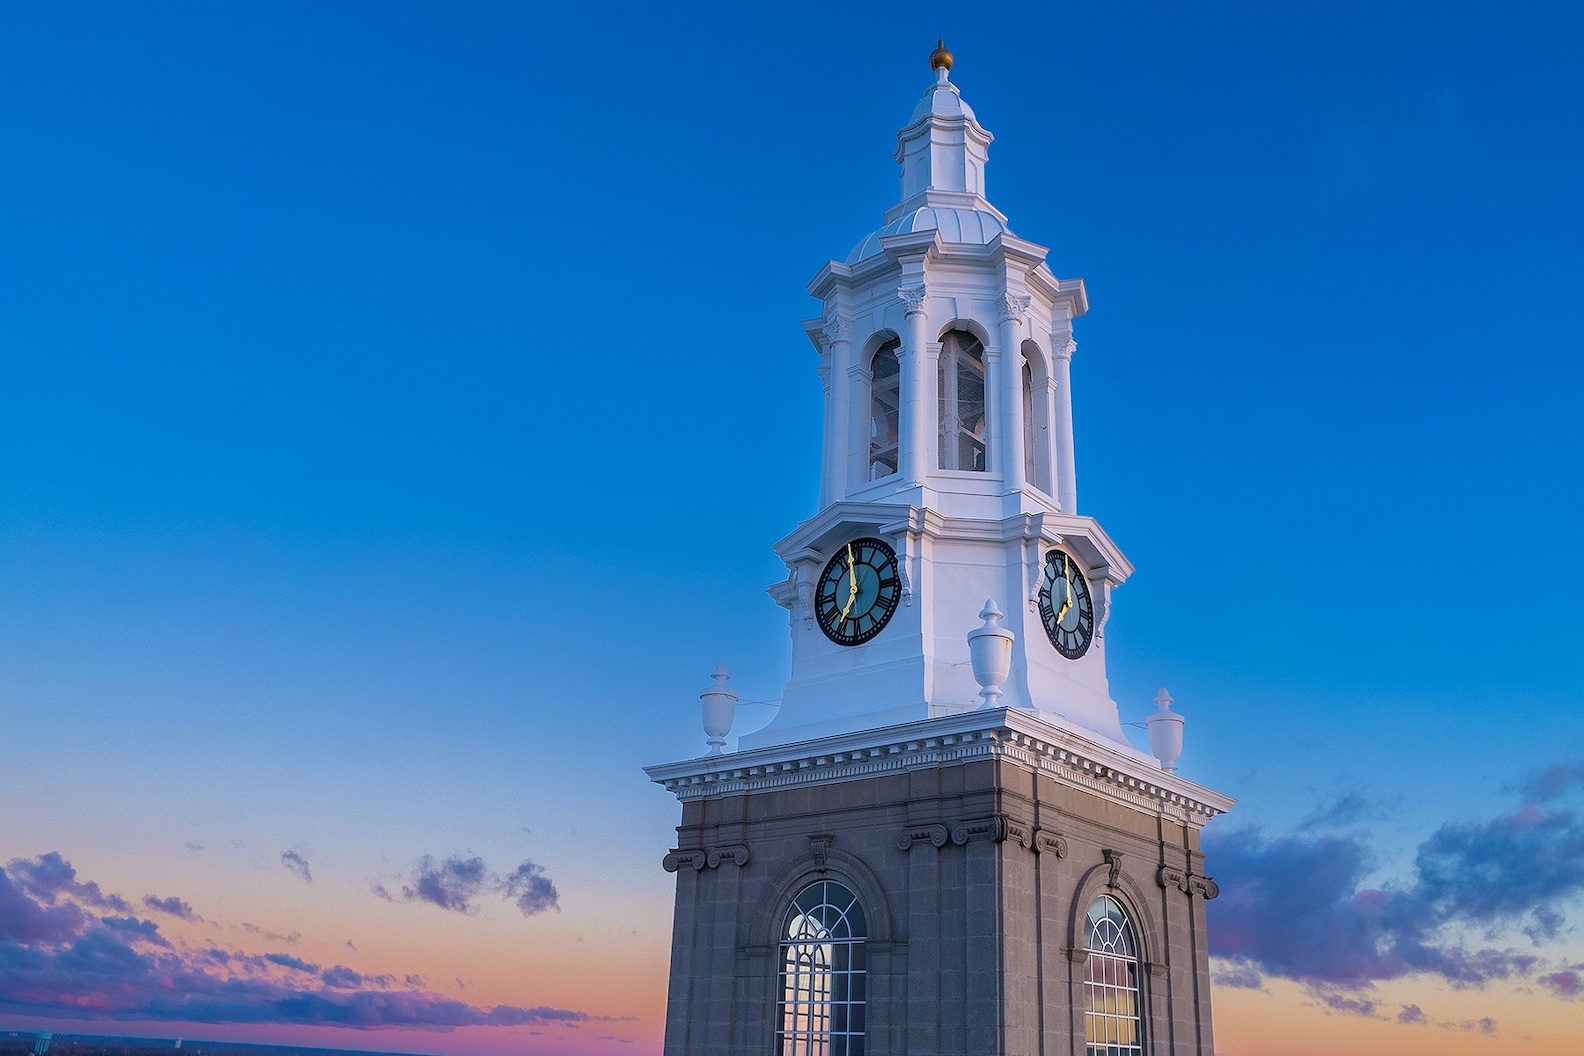 The iconic Hayes Hall clock tower on UB's South Campus. (Photo by Douglas Levere // UB)